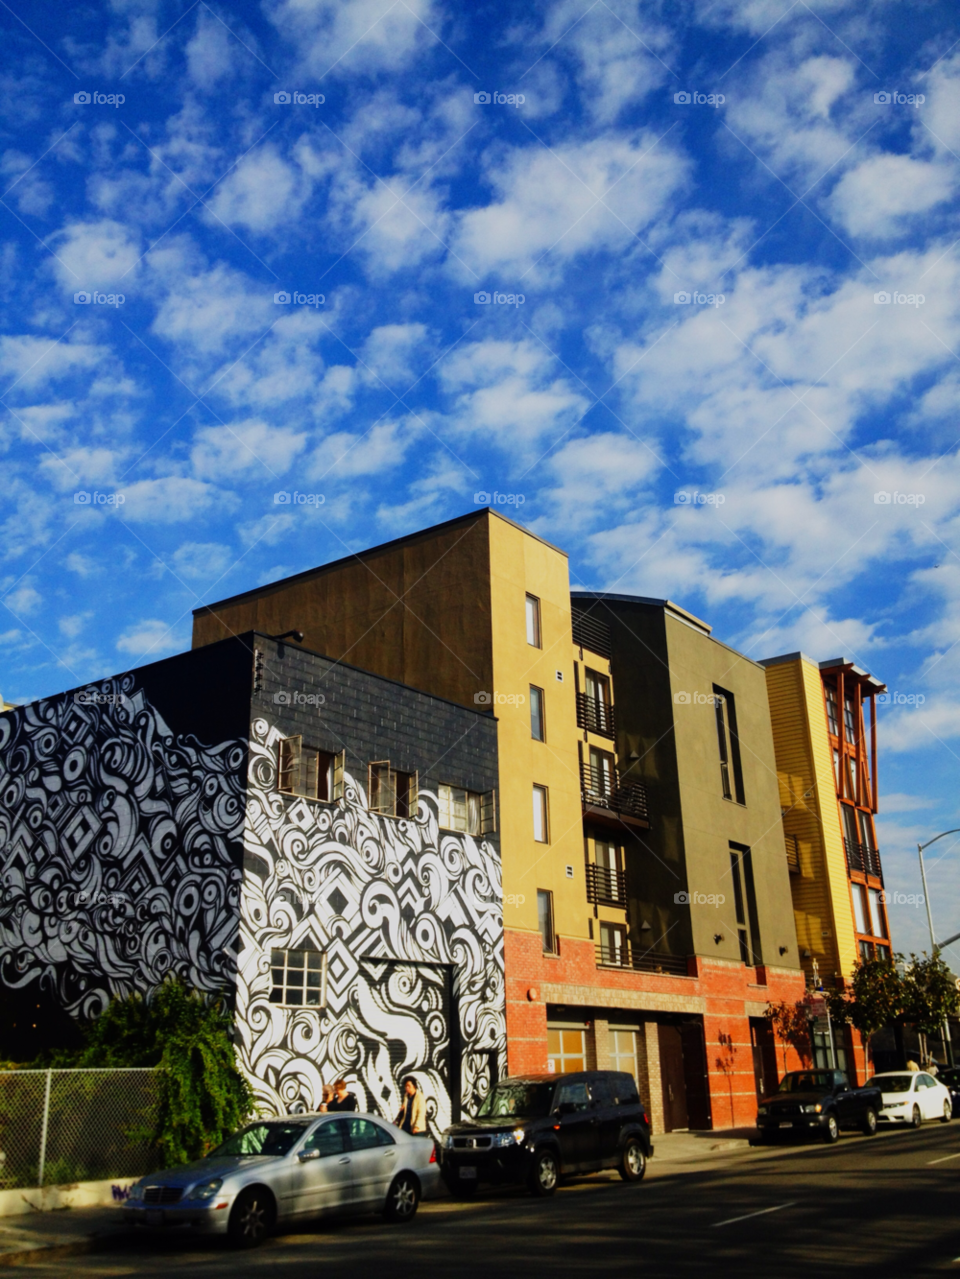 san francisco california usa architecture building sky blue clouds mysore sf mural san francisco ca by nathaliebooth